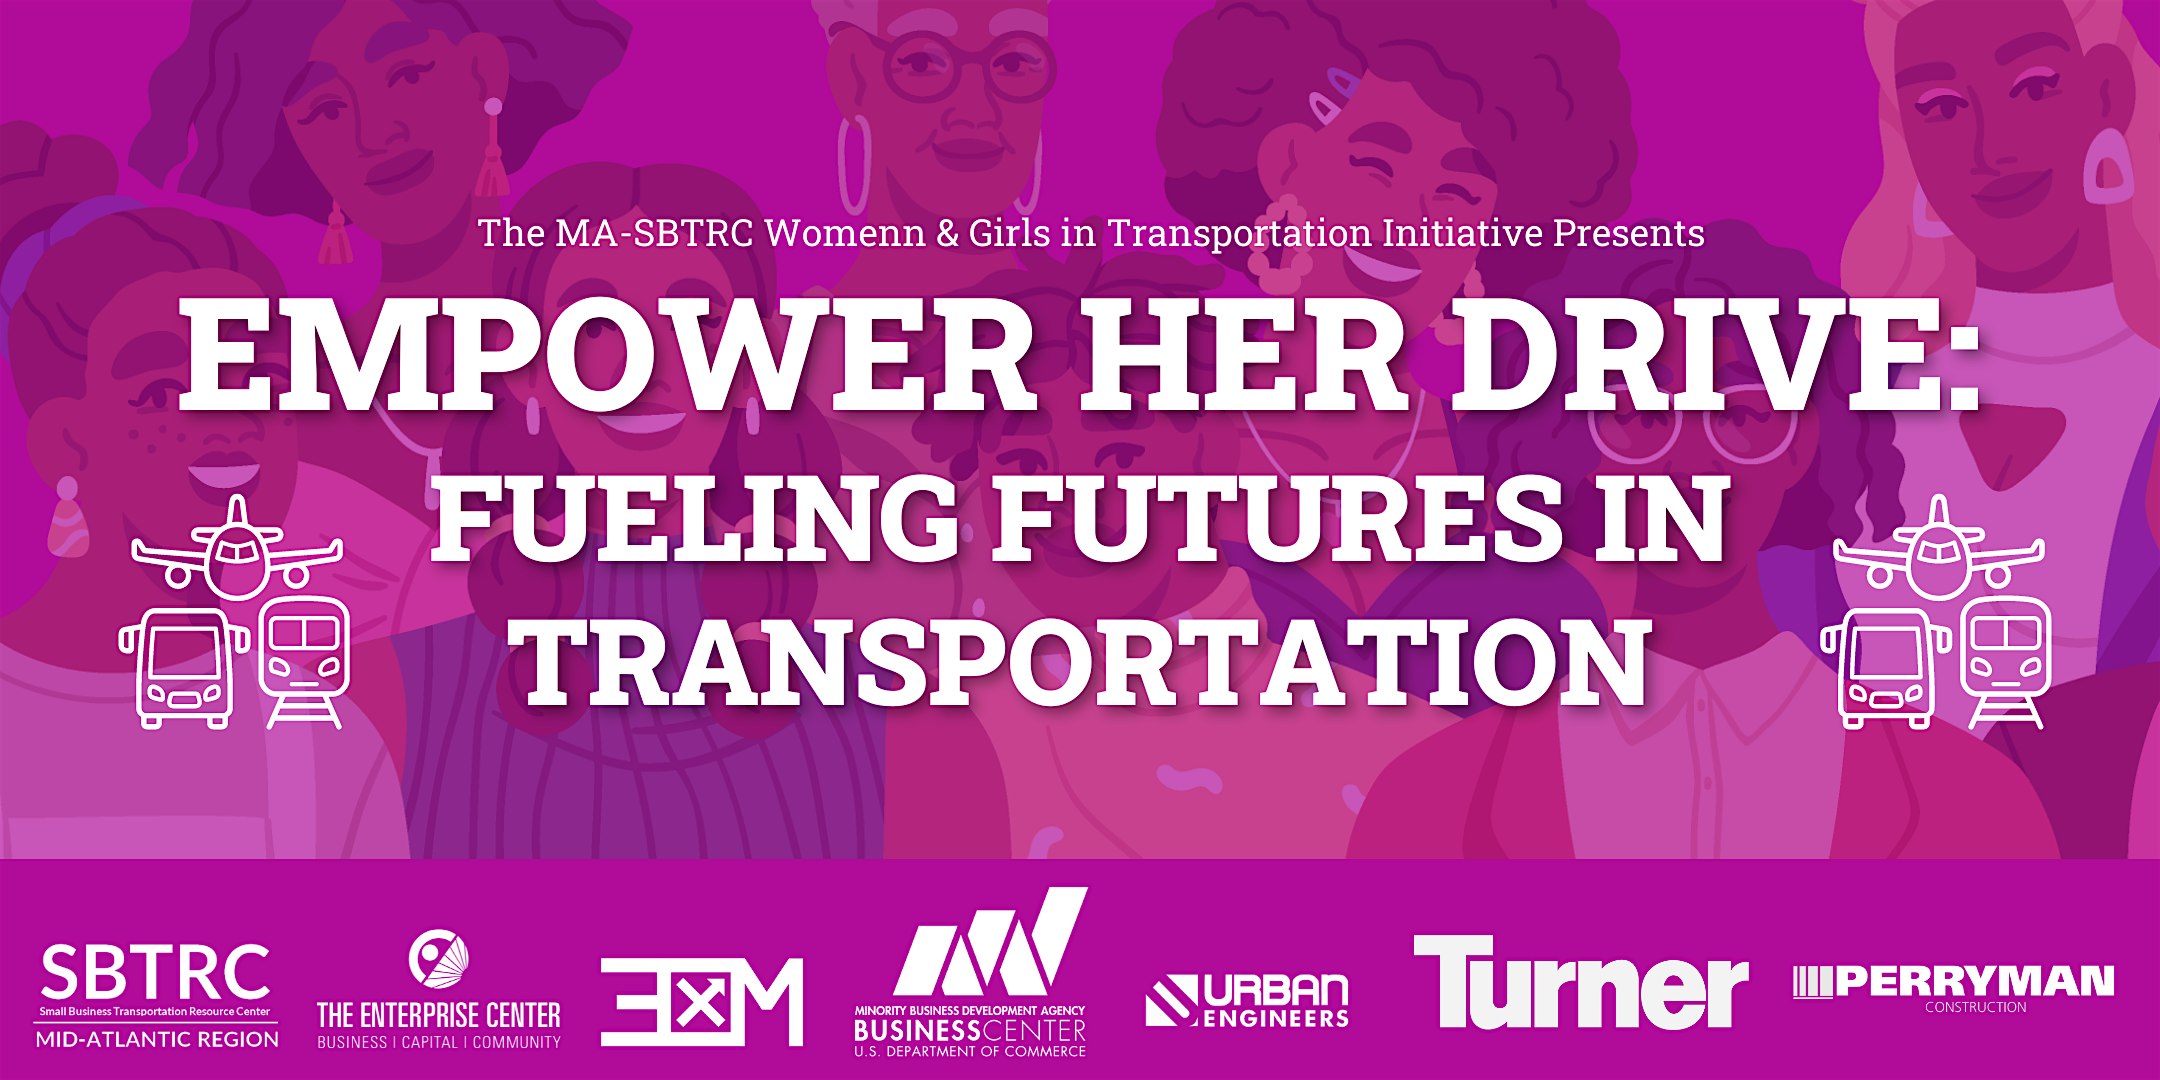 Empower Her Drive:  Fueling Futures in Transportation